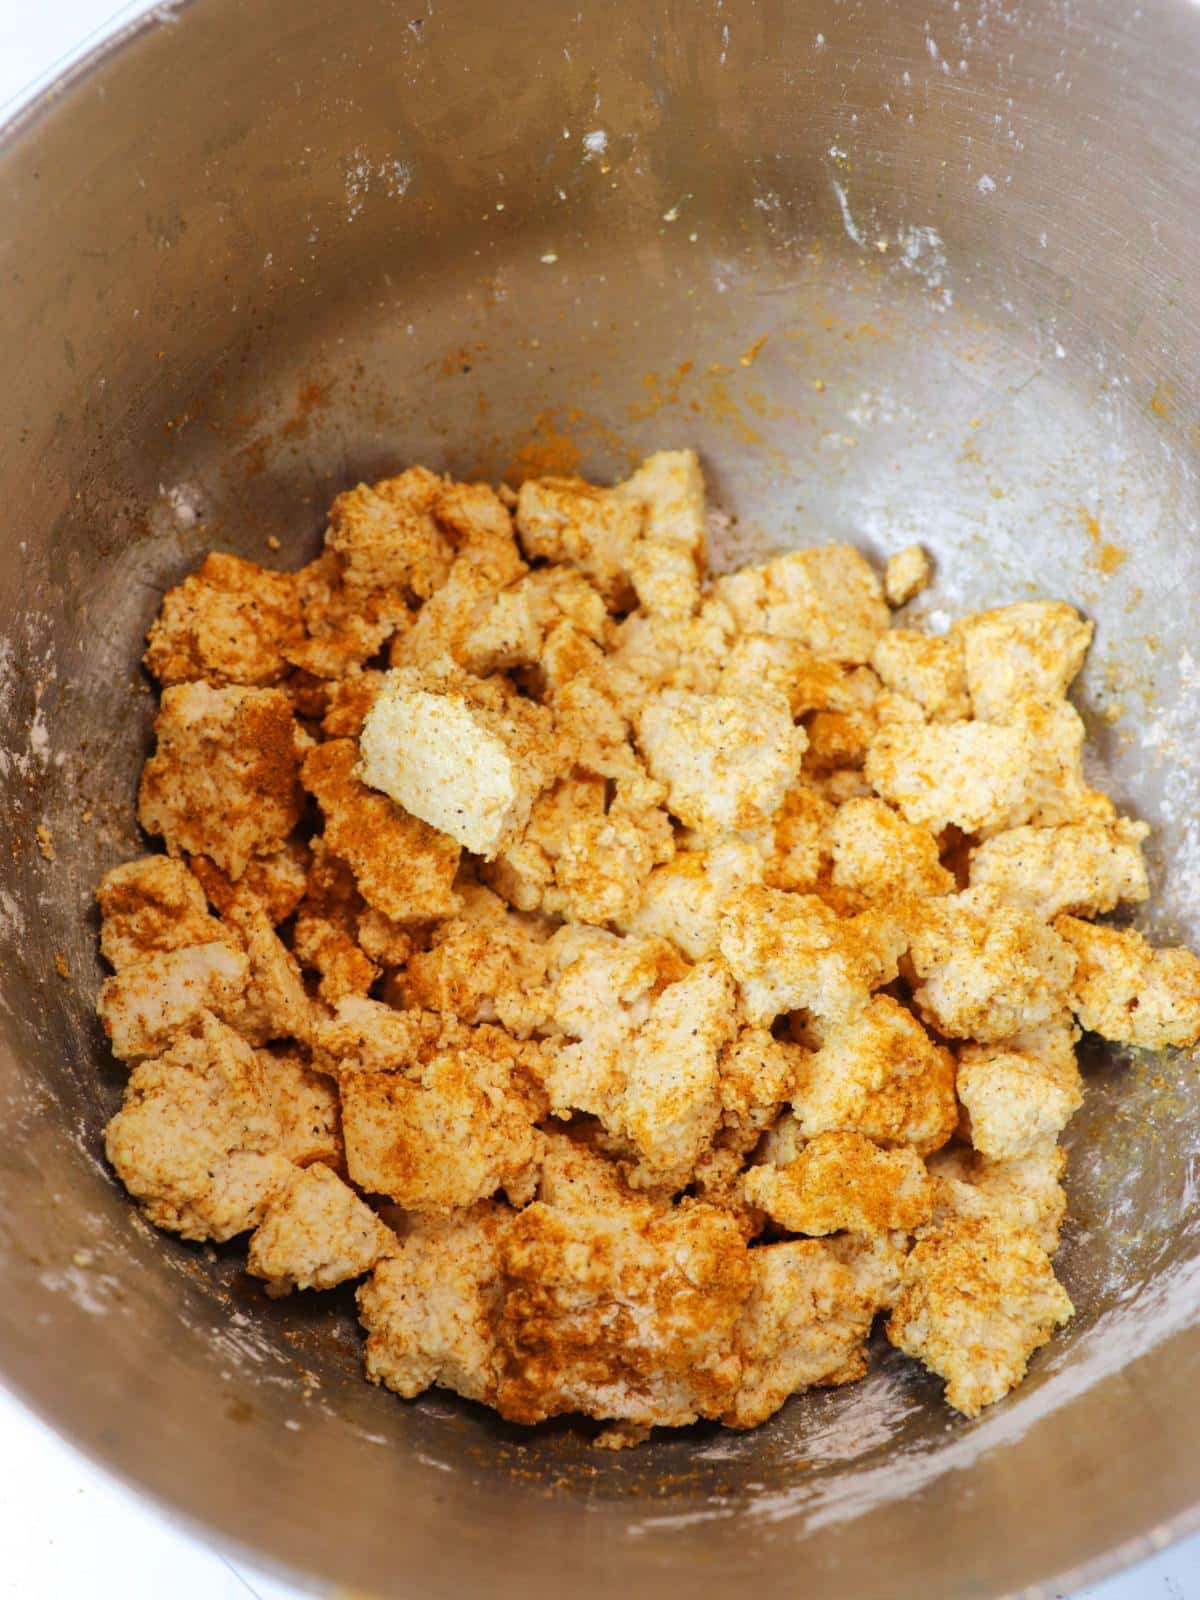 Tofu pieces in a mixing bowl with curry powder and corn starch.